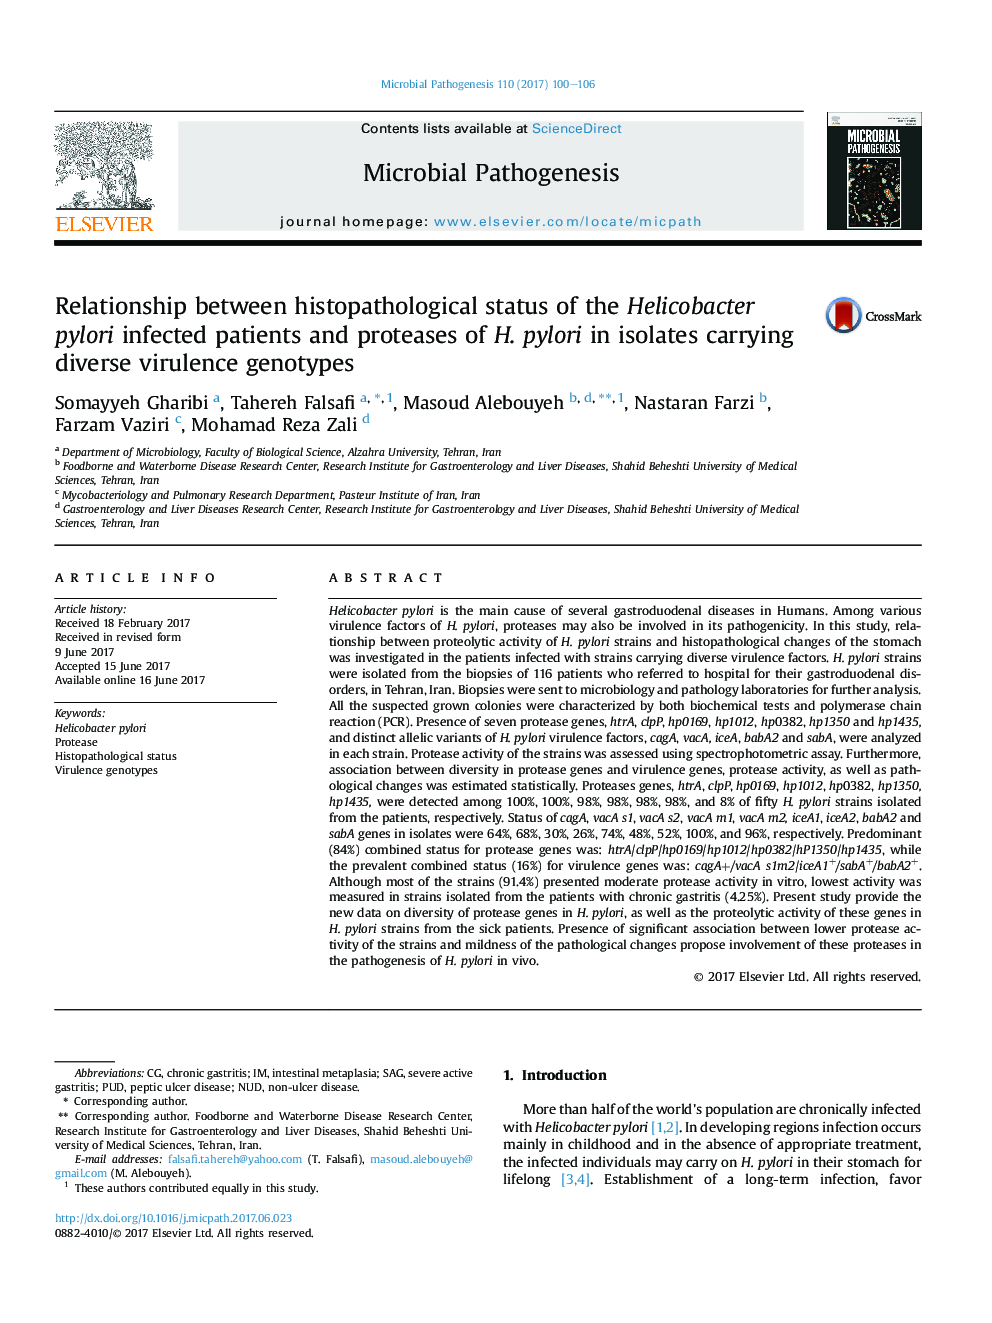 Relationship between histopathological status of the Helicobacter pylori infected patients and proteases of H.Â pylori in isolates carrying diverse virulence genotypes